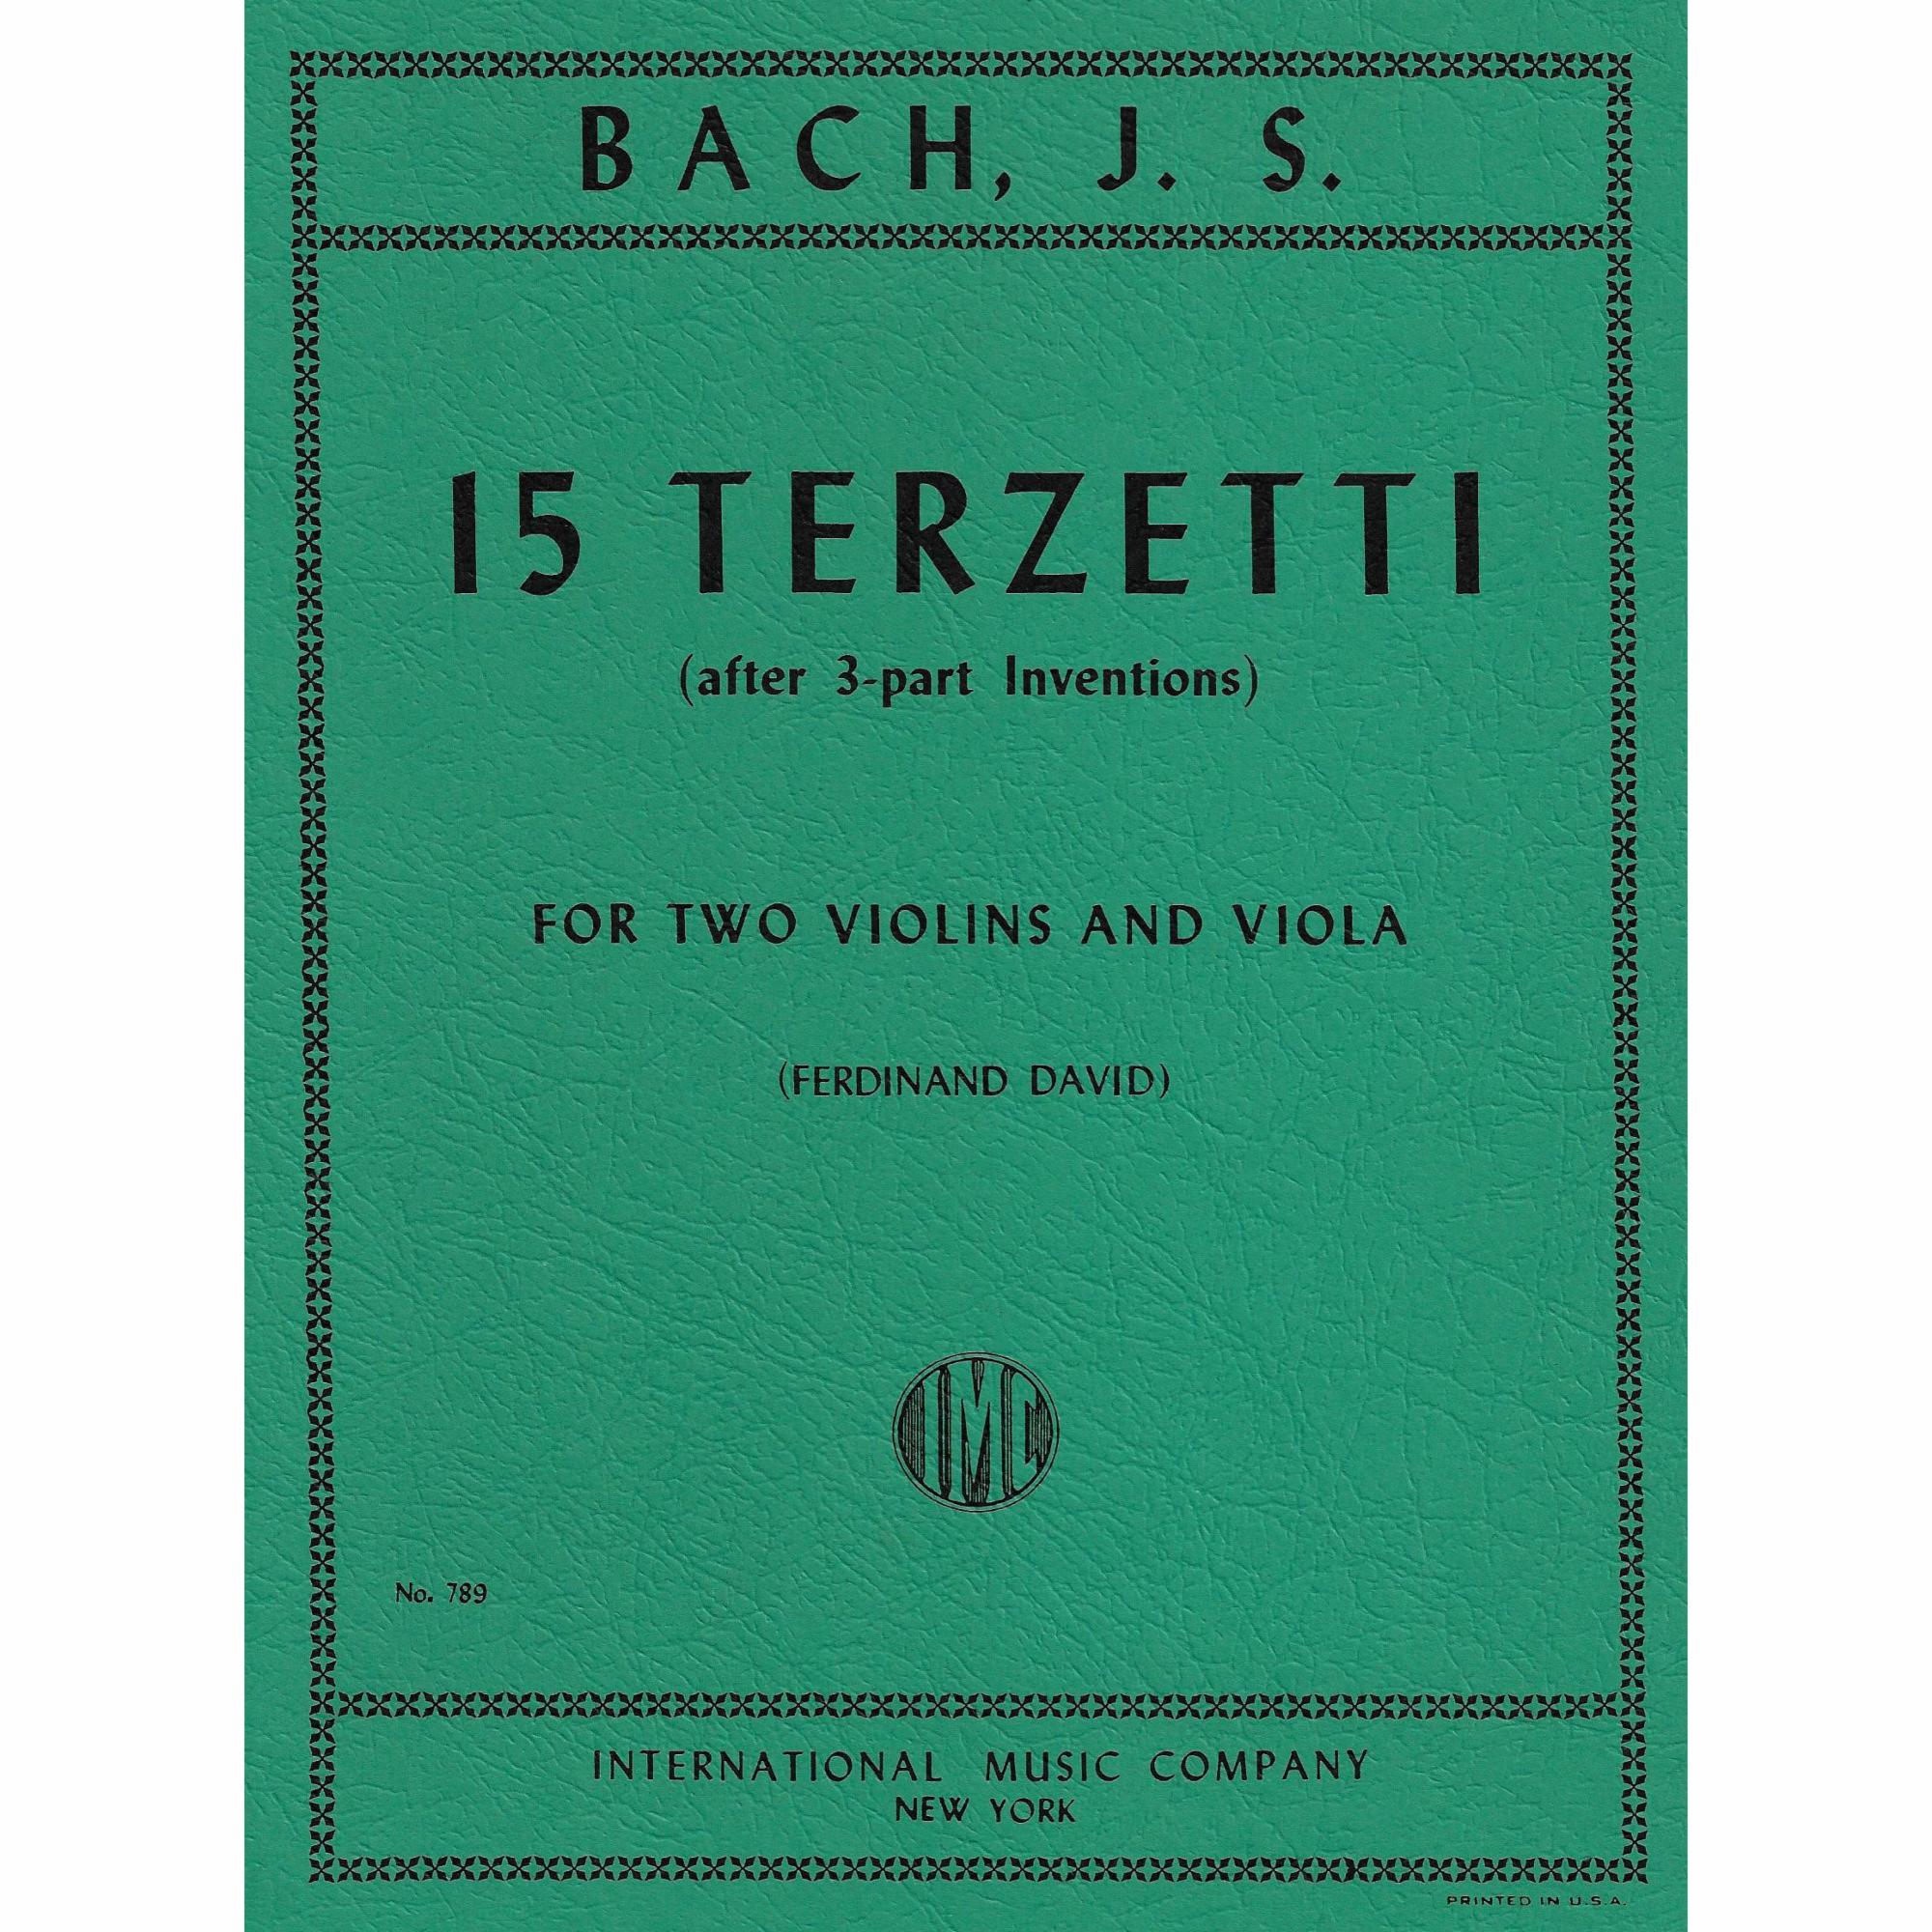 Bach -- 15 Terzetti (after 3-part Inventions) for Two Violins and Viola